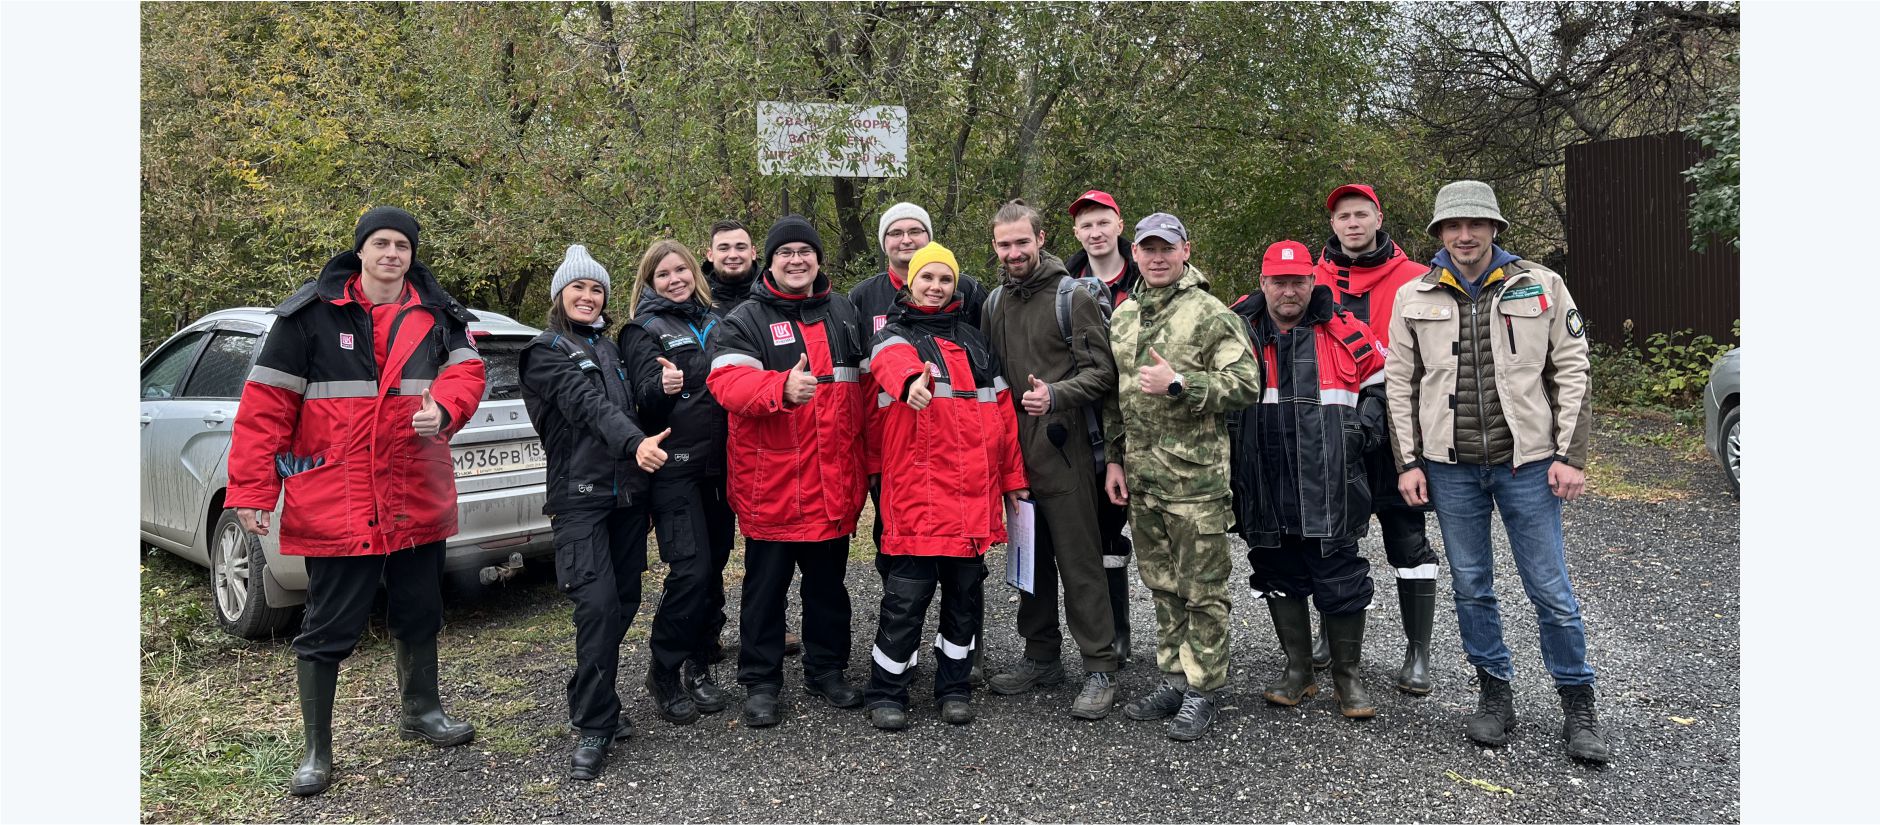 Autumn volunteer Saturday clean-up to remove garbage from the banks of the Pyzh River